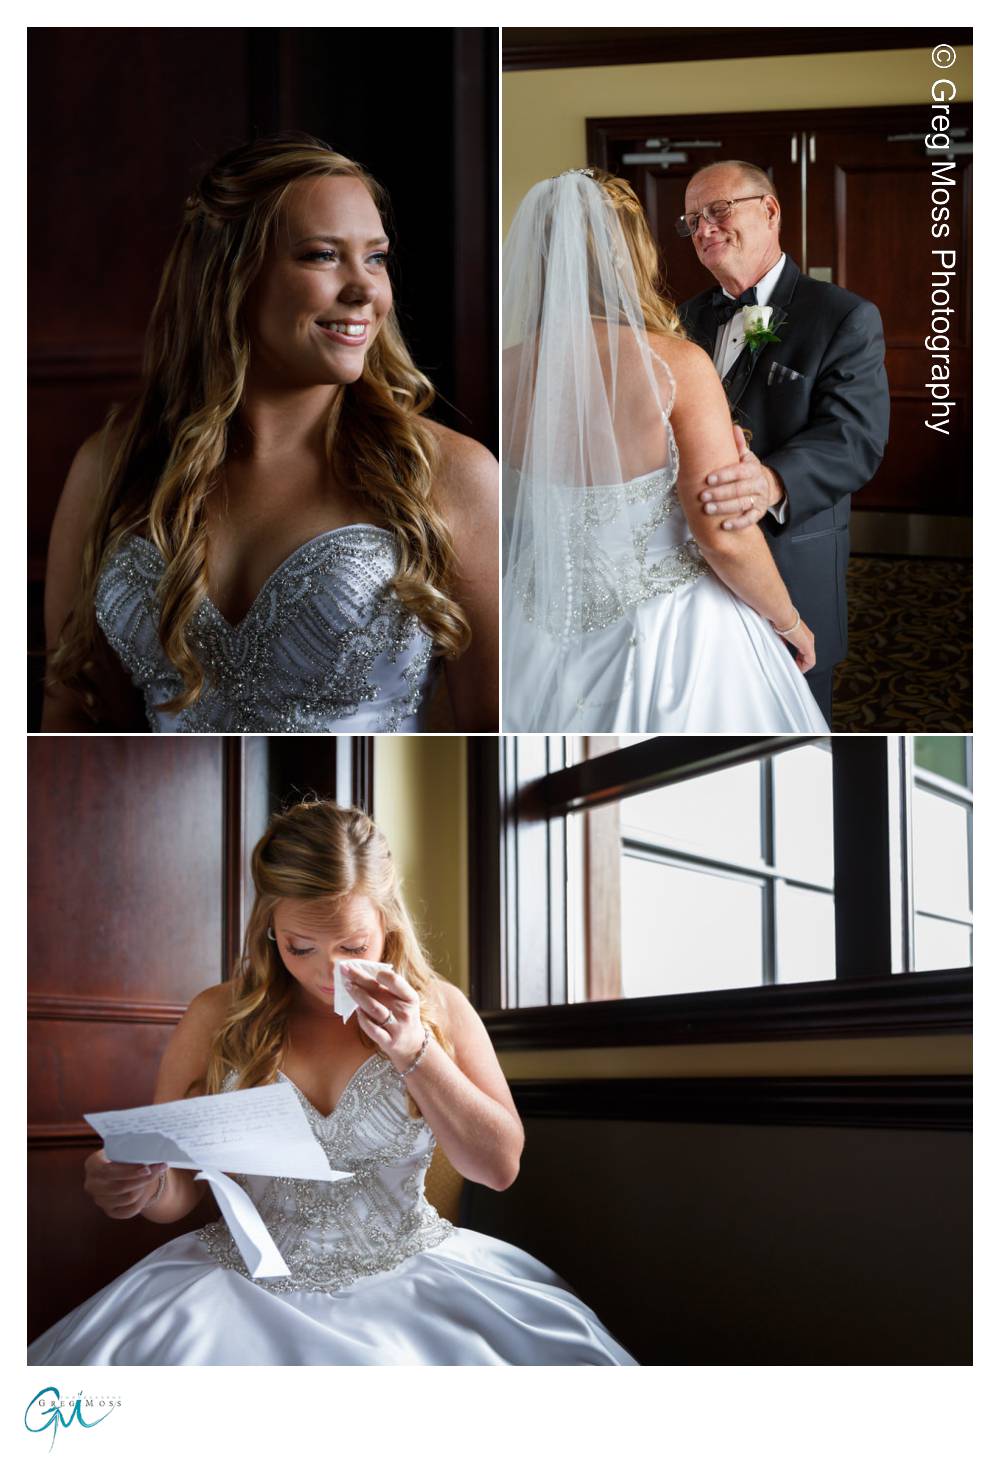 Bride reading letter from groom, first look with father and window light portrait